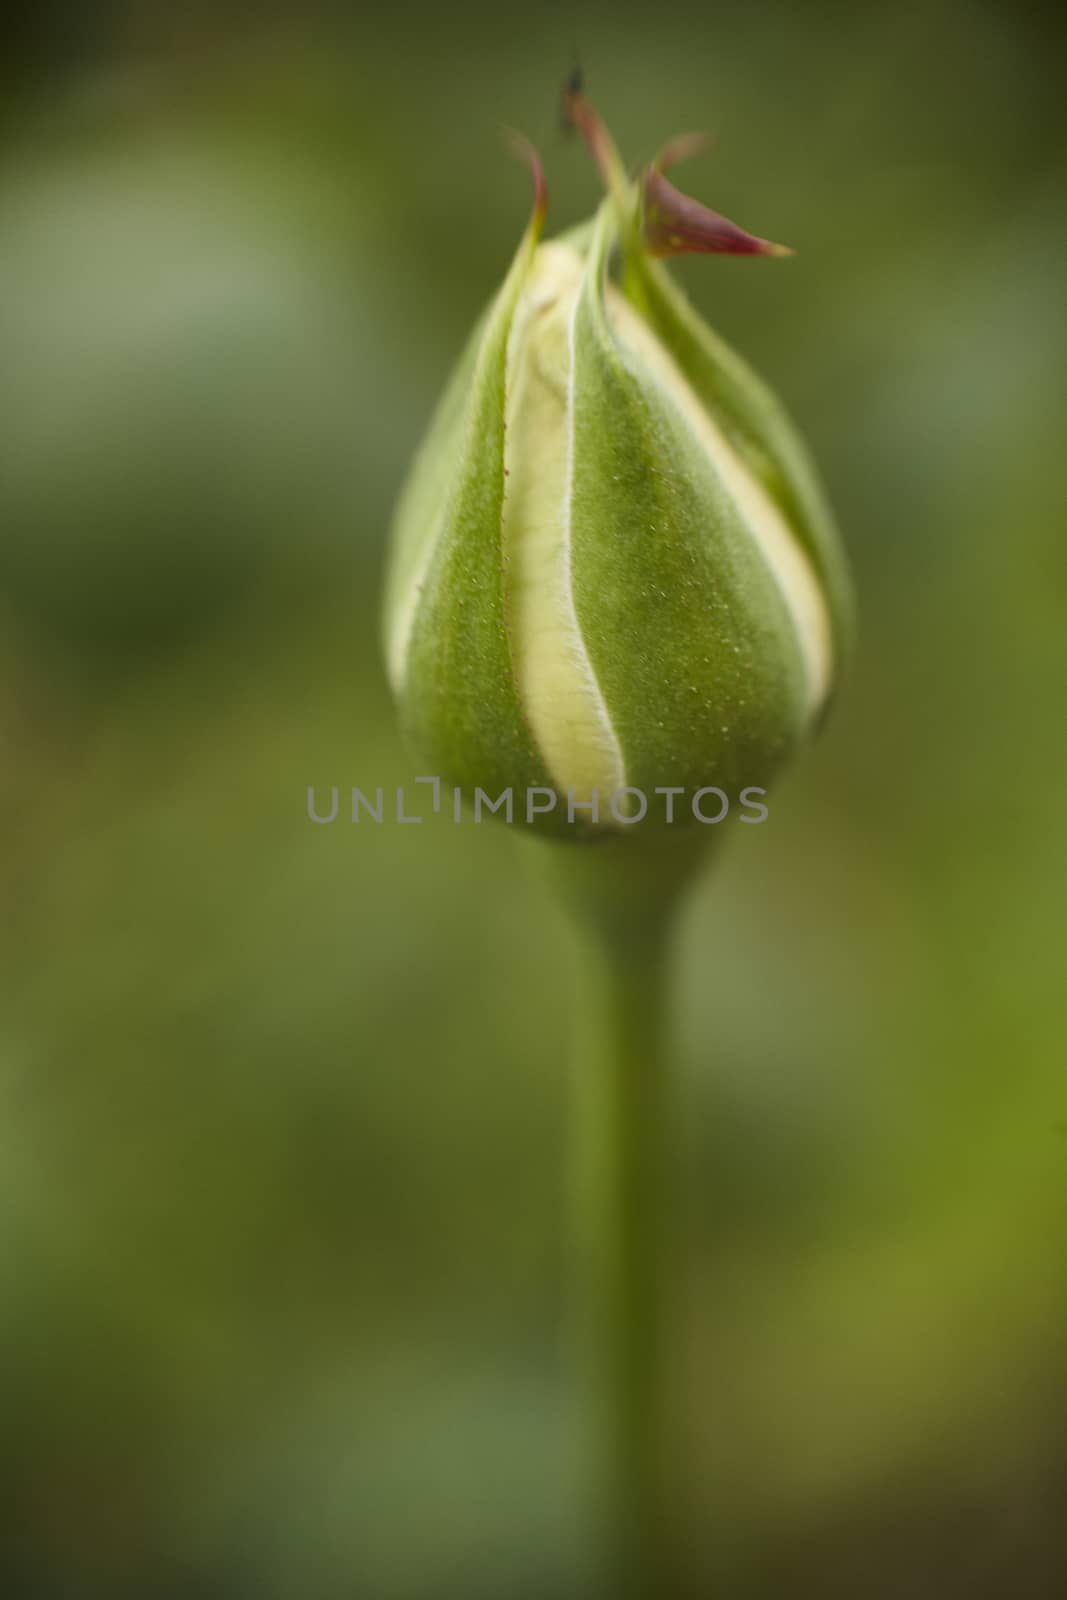 Bud of a rose taken with macro lens on a green background.